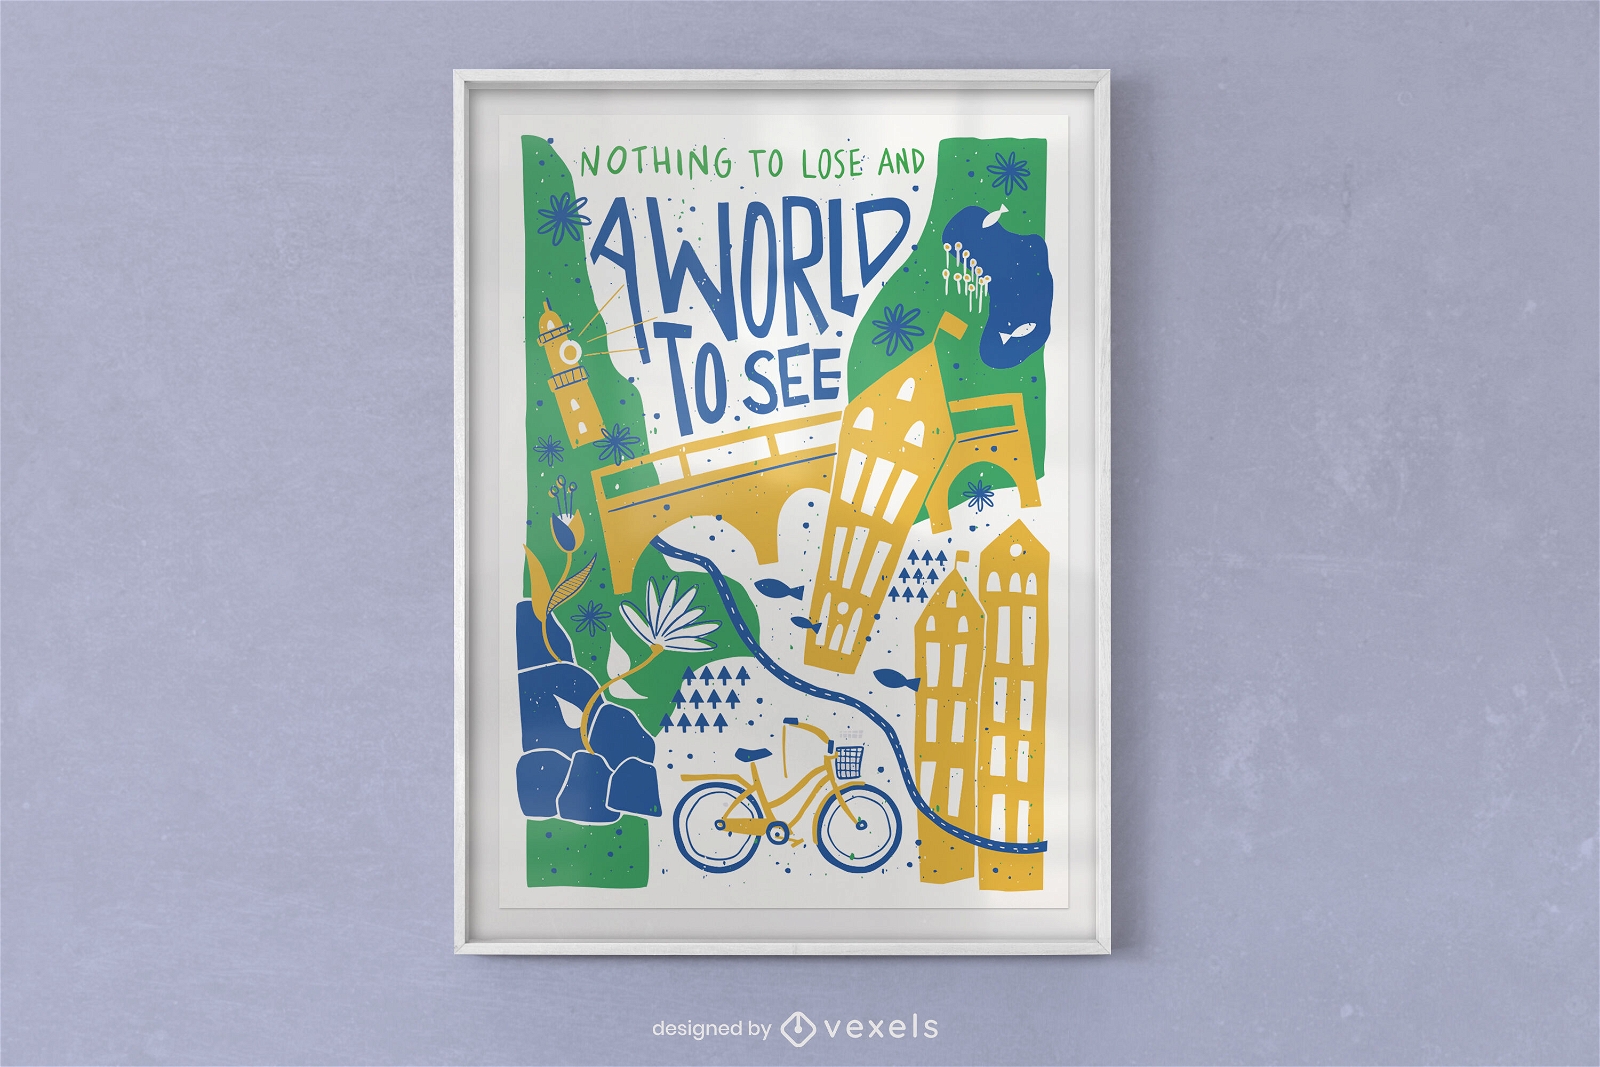 See the world travel poster design